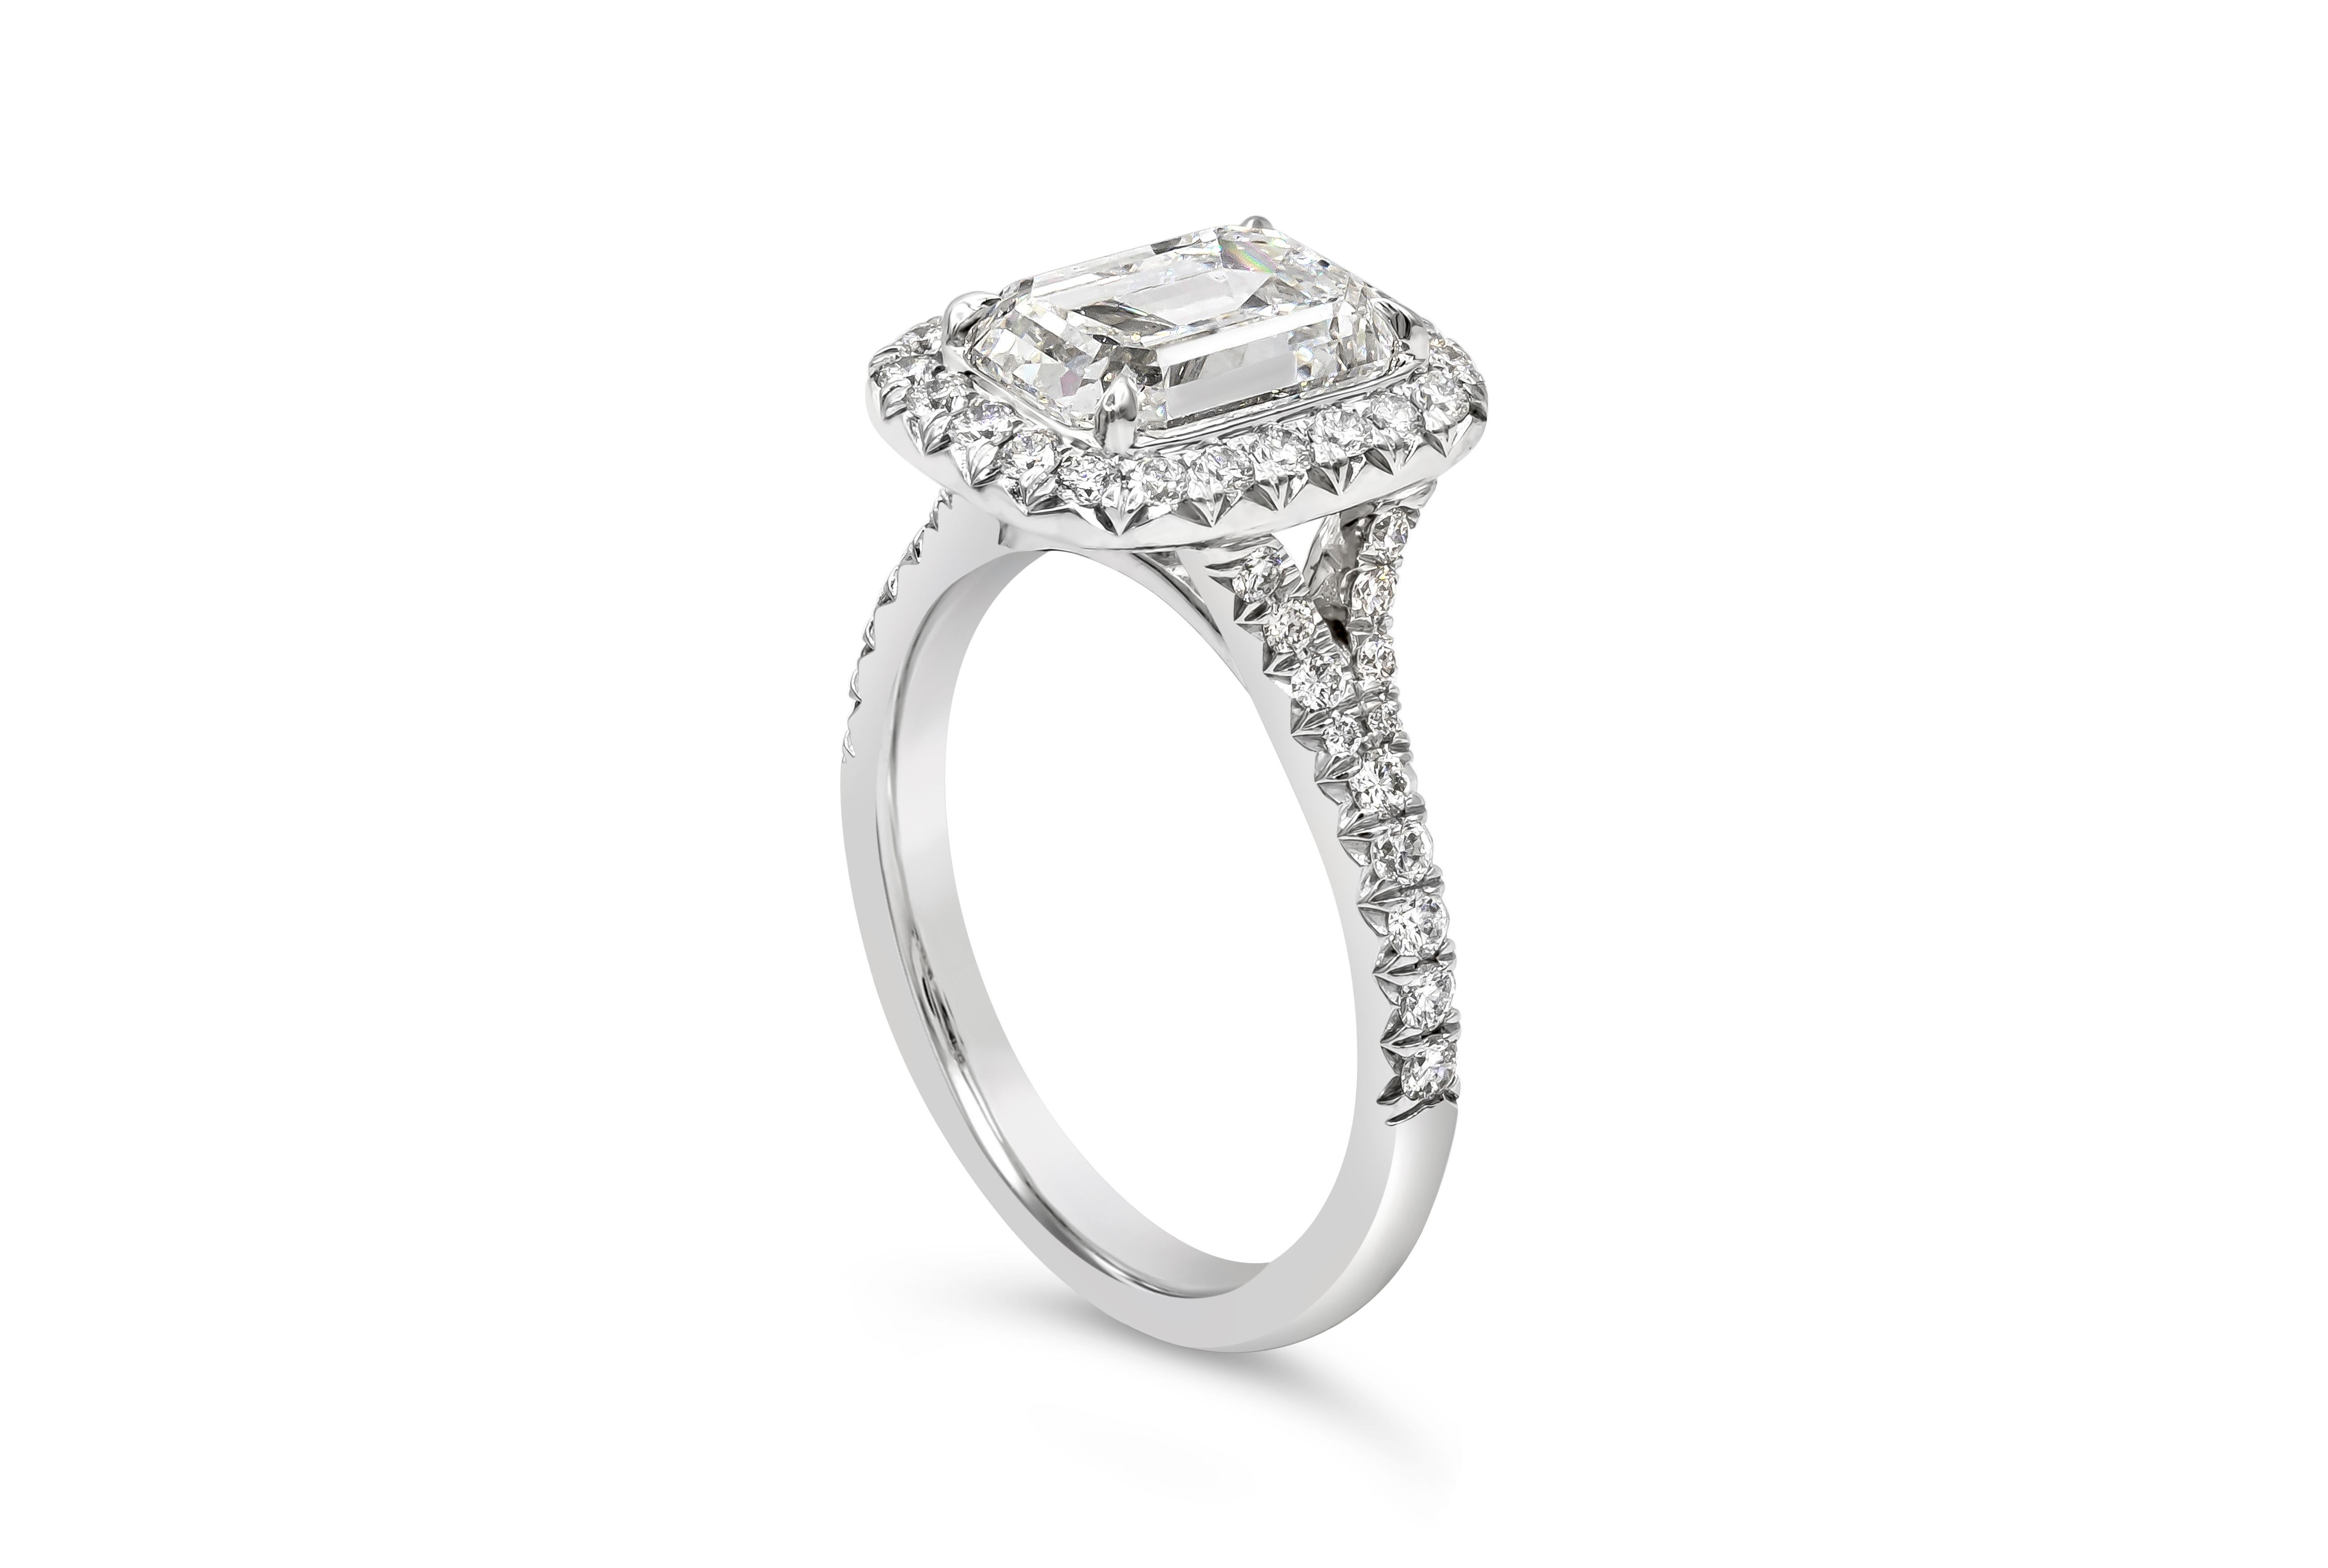 An engagement ring that features a 2.51 carats emerald cut diamond certified by GIA as F color and SI1 clarity. Surrounded by a single row of round brilliant diamonds of 0.52 carat total and set in a platinum mounting. Size 6 US, resizable upon